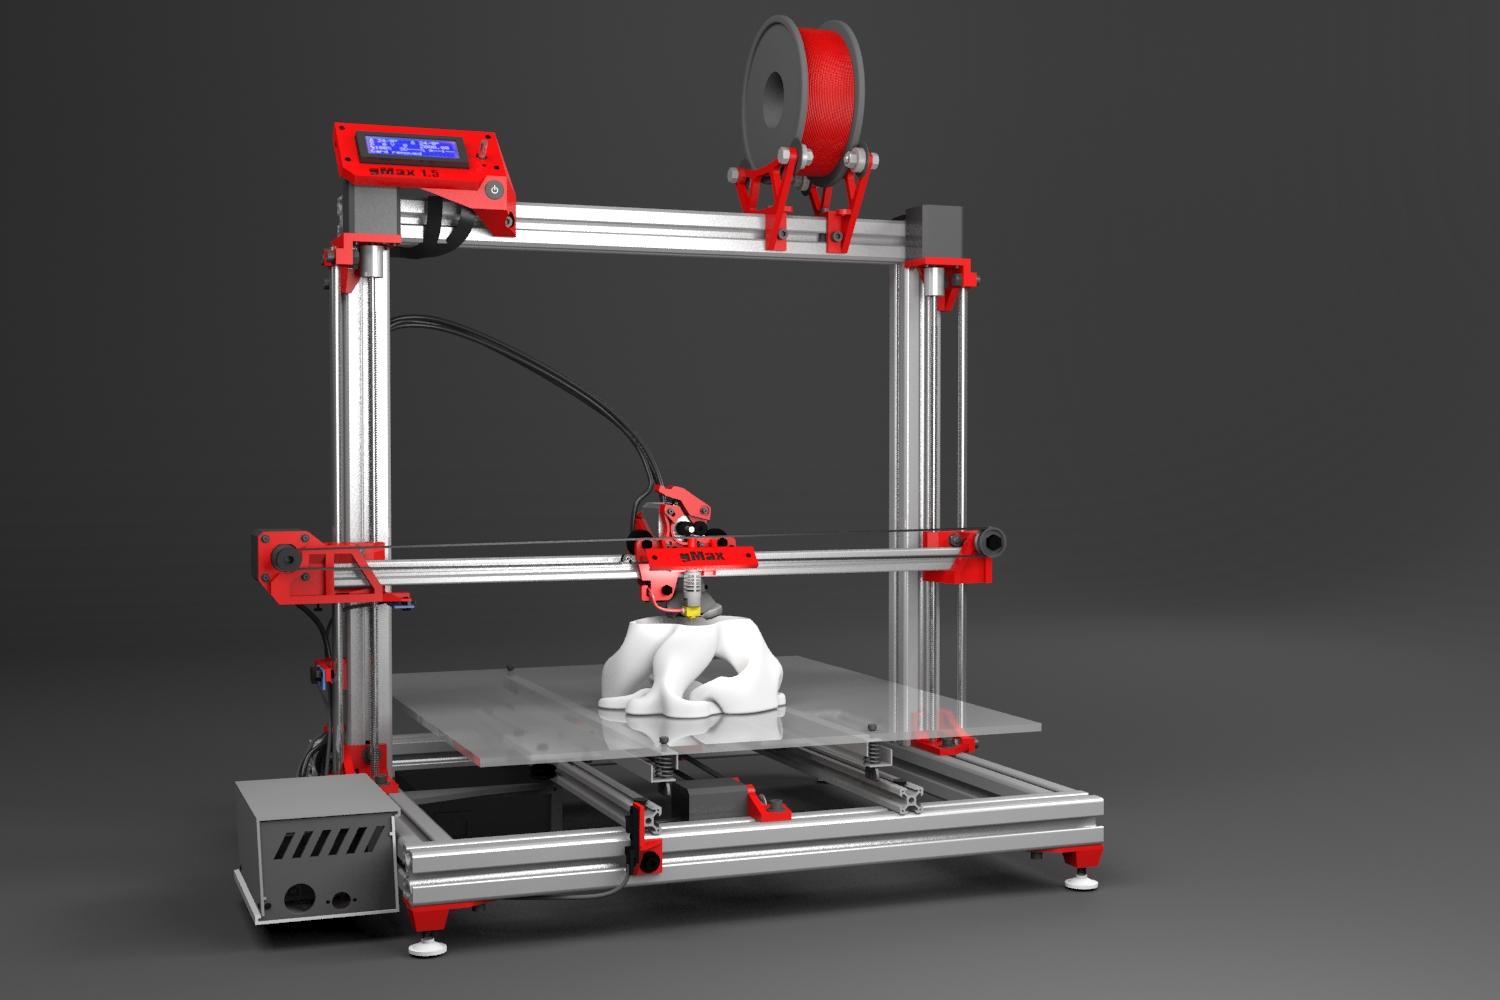 gCreate Launches Two New Large Volume 3D Printers, The gMax 1.5 & gMax ... - Gm2